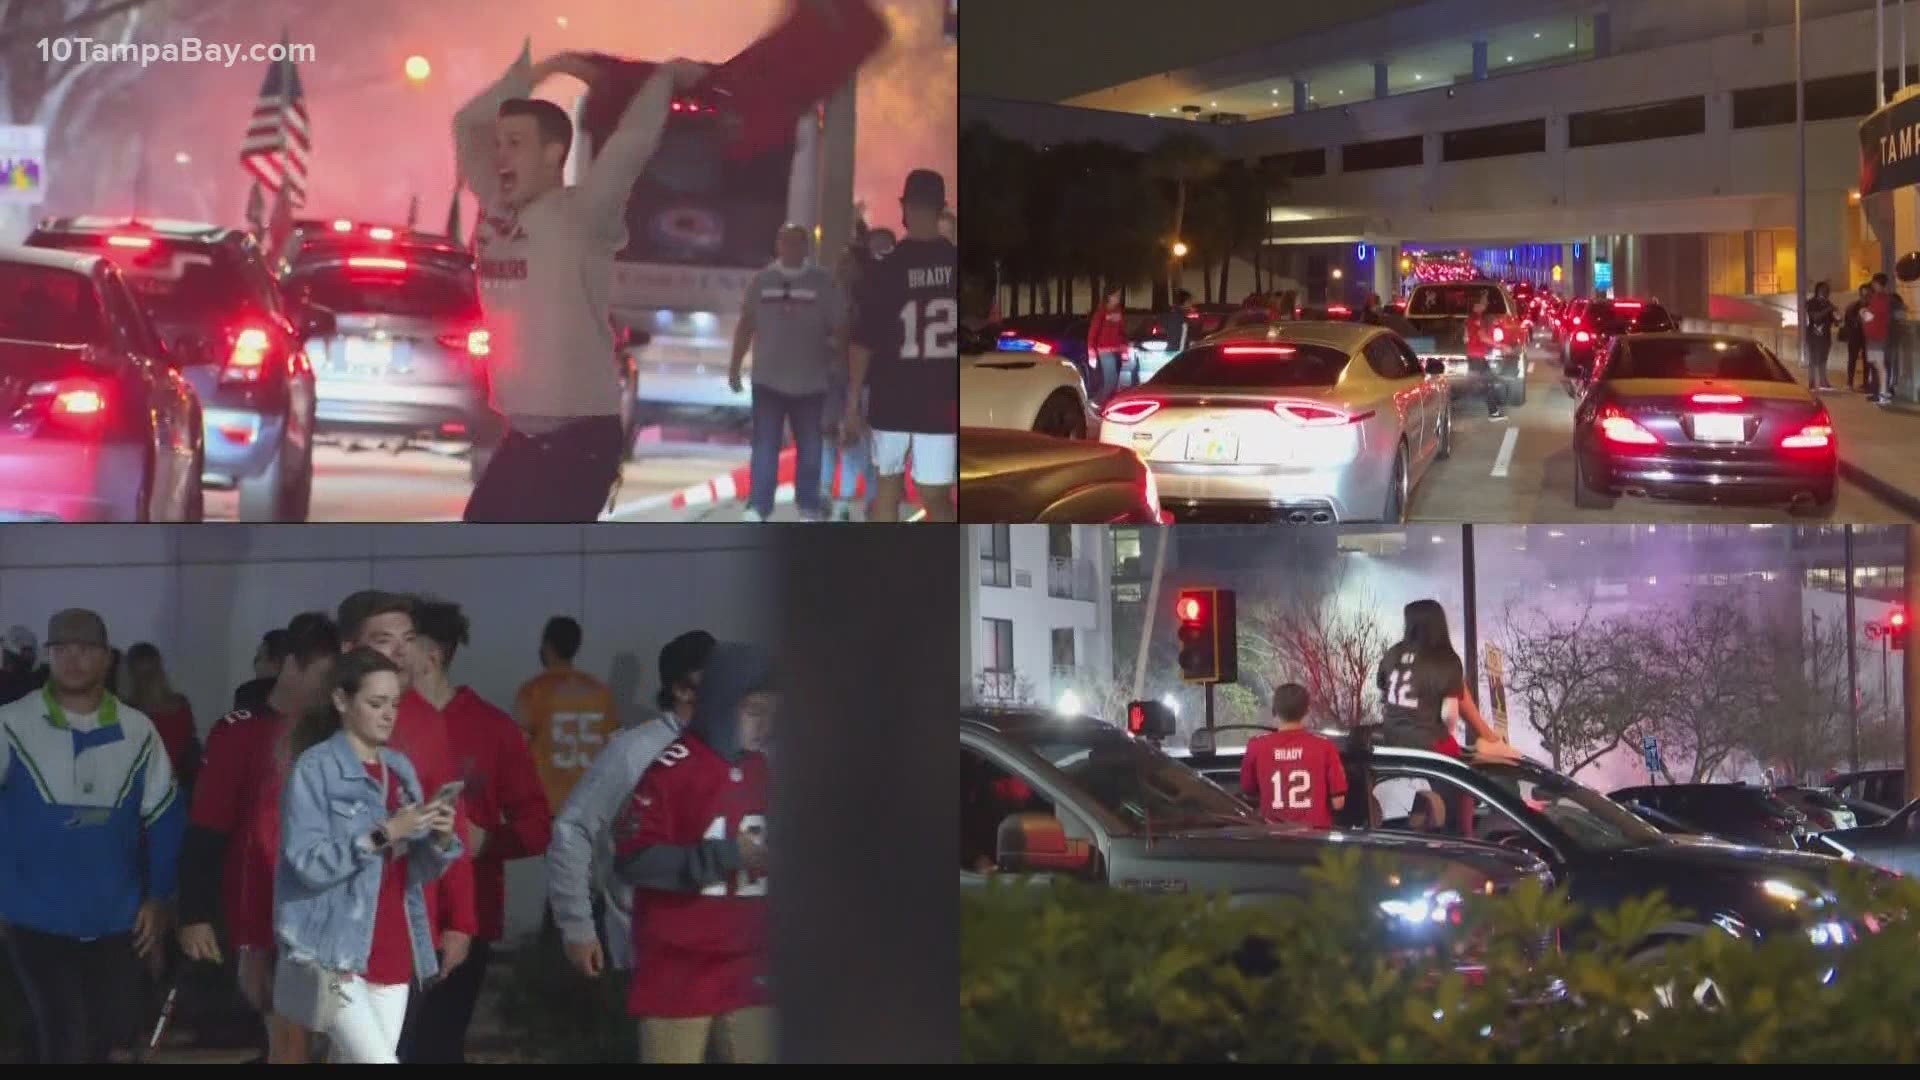 Social media posts show fans removing street signs and throwing barricades through the street.